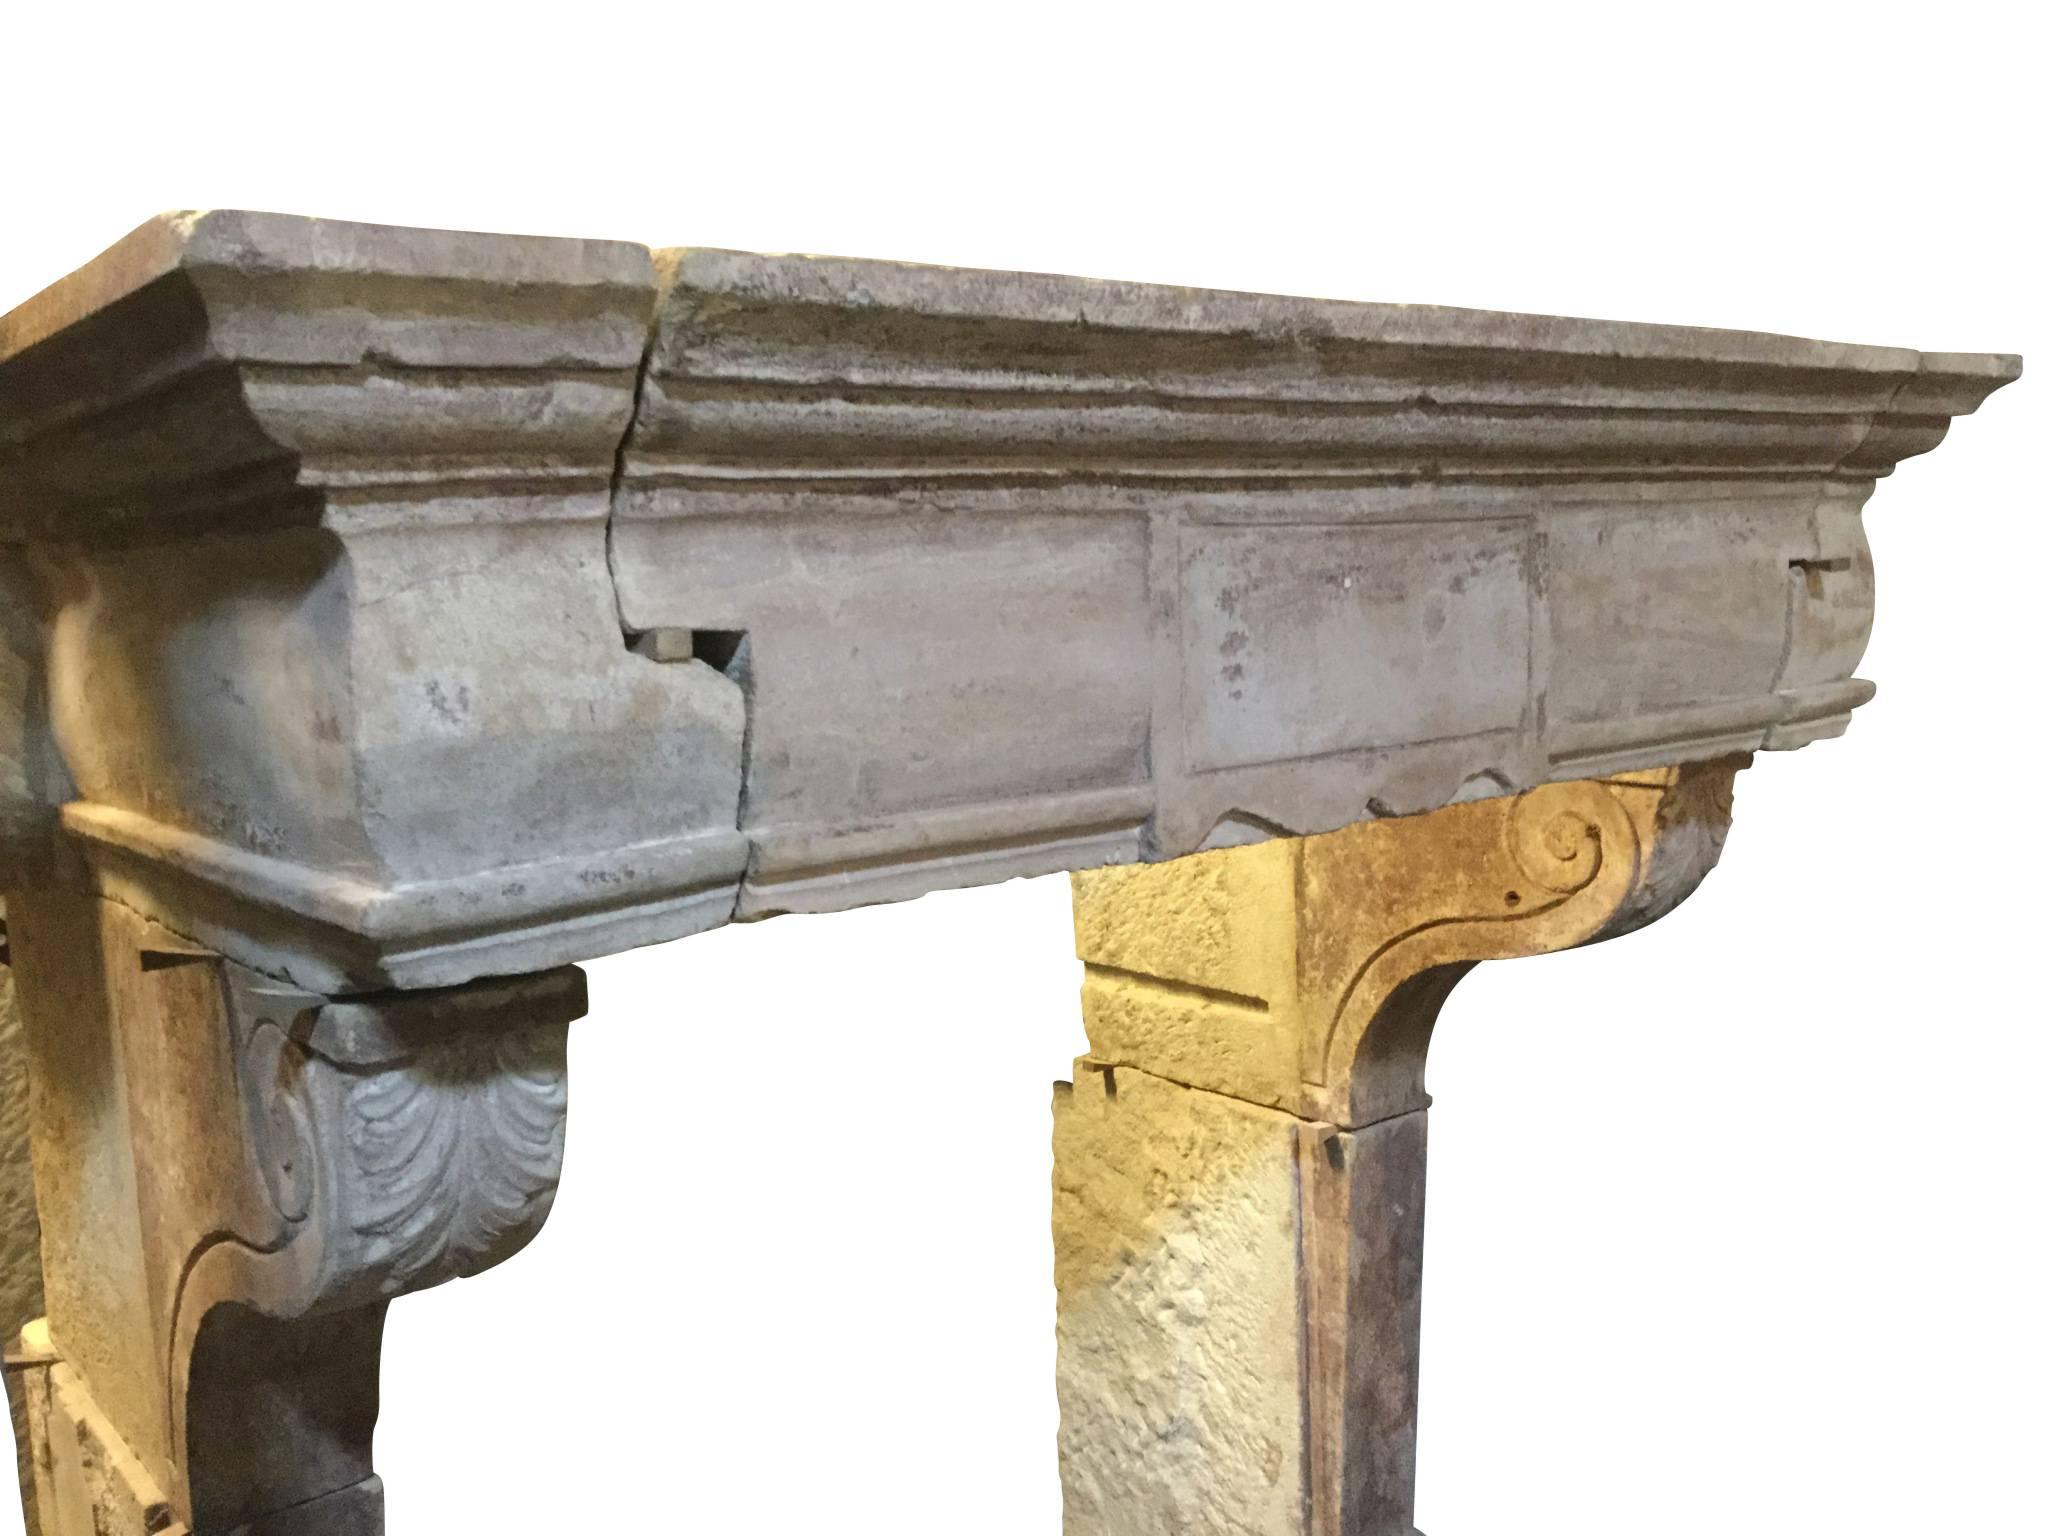 16th century, one of a kind original limestone fireplace surround with remains of the original patina. The sizes, petite, for the Renaiscance period makes this one even more interesting and easy fit in different room sizes. a real state of the art